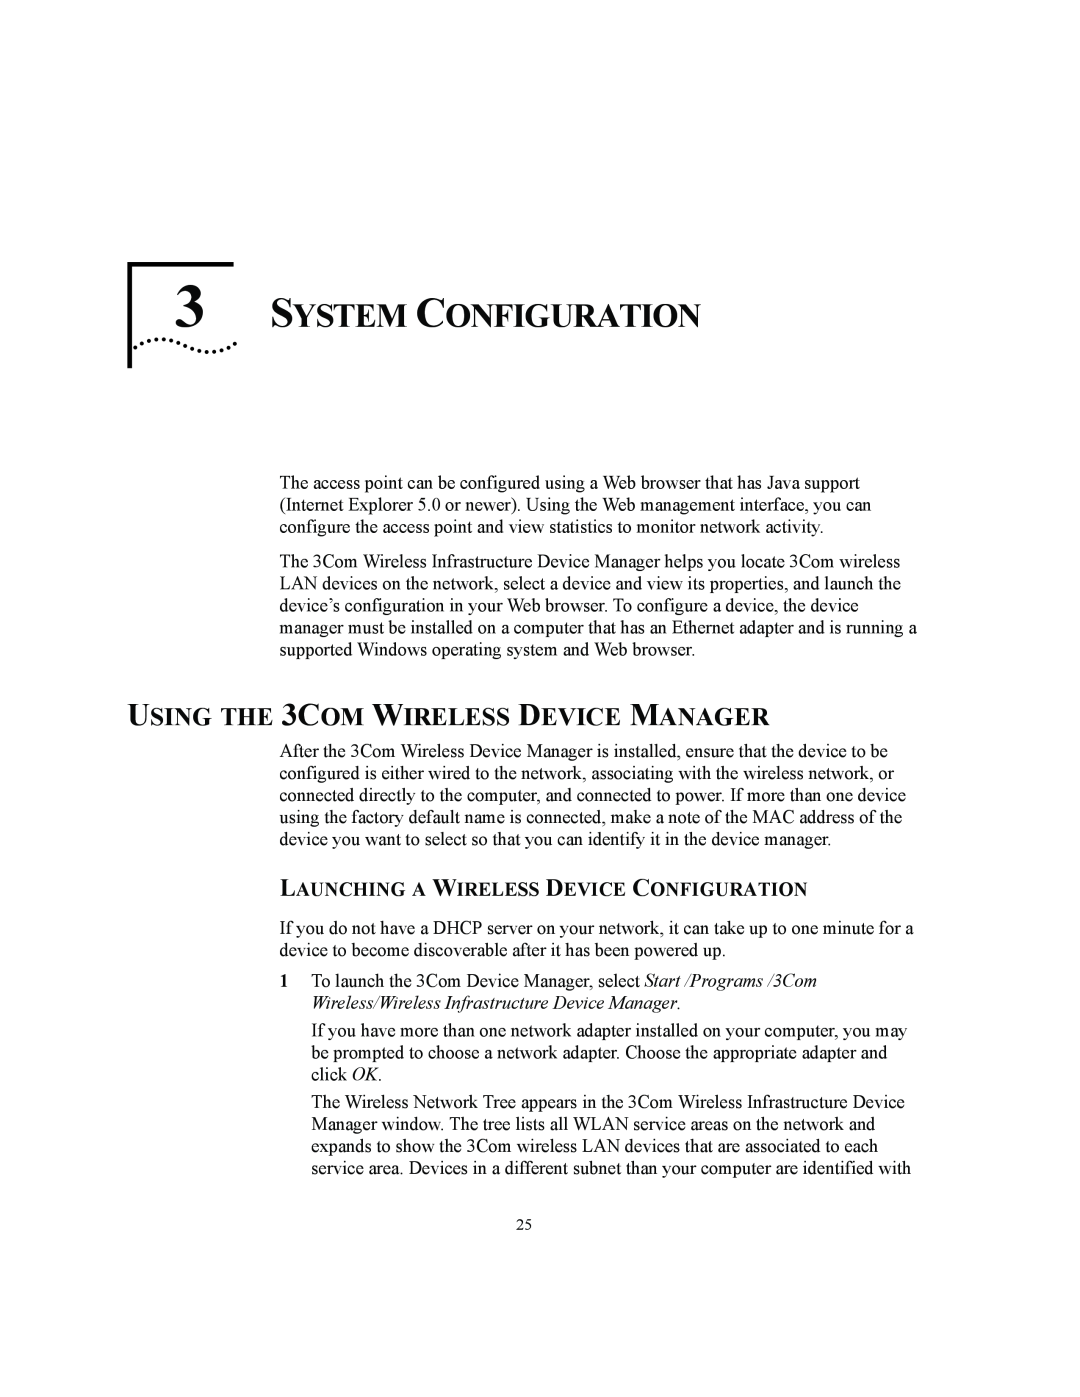 3Com 3CRWE825075A System Configuration, USING THE 3COM WIRELESS DEVICE MANAGER, Launching A Wireless Device Configuration 